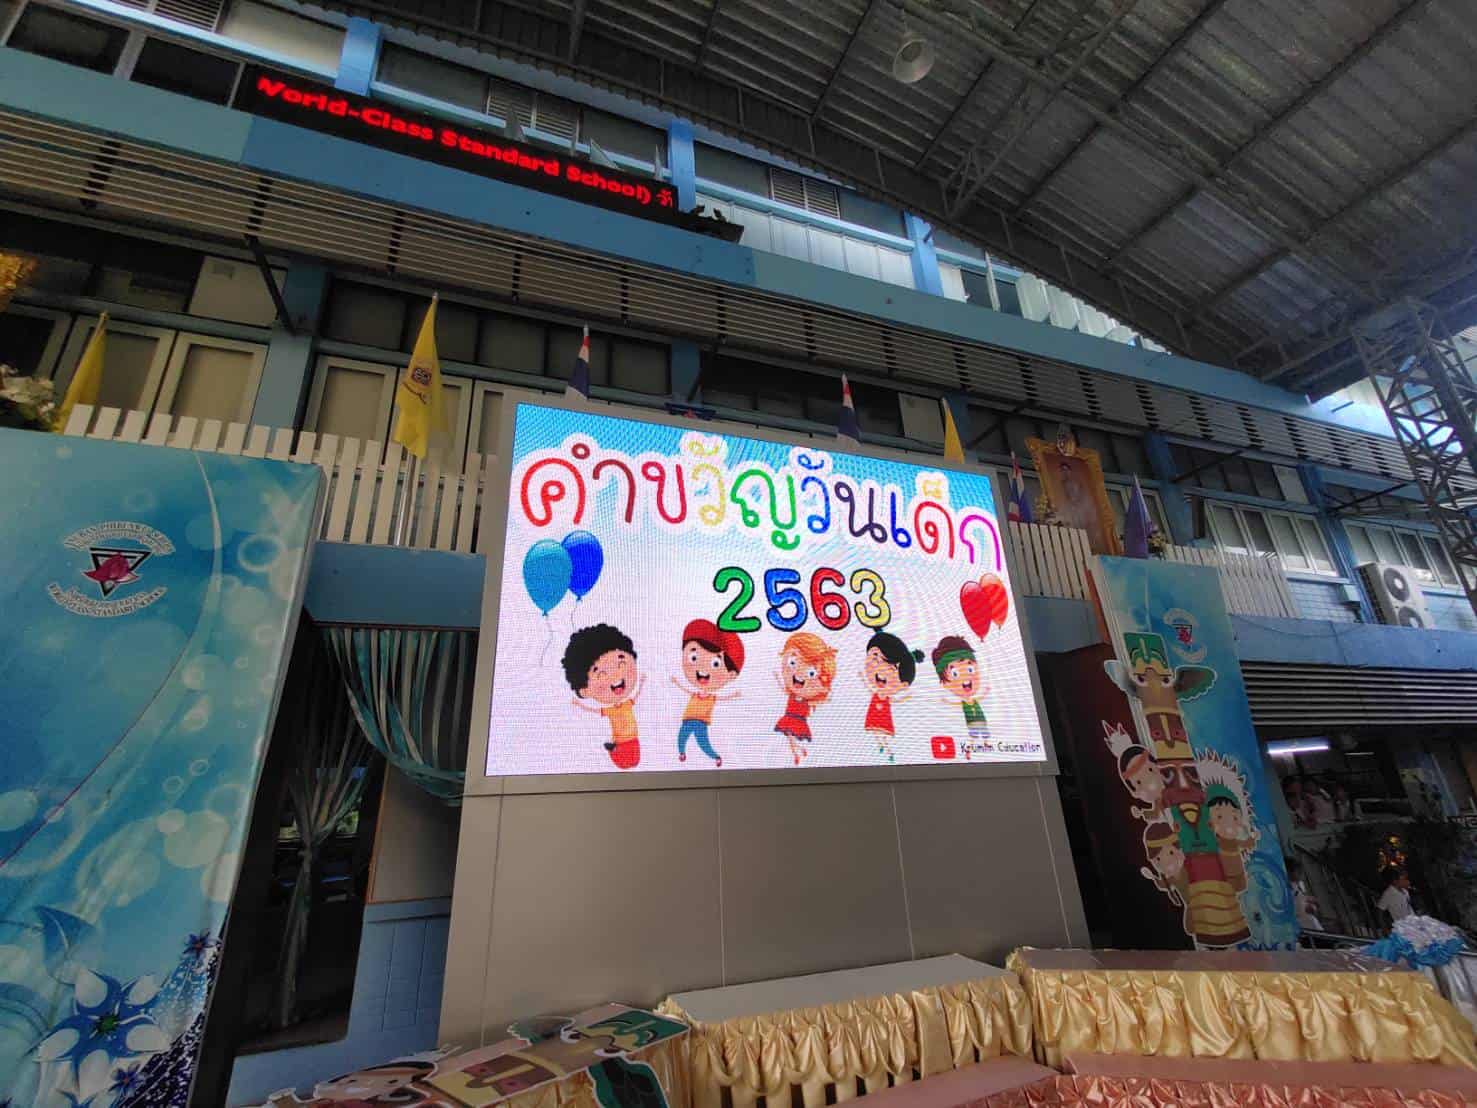 BUY A LASTING LED ADVERTISING SCREEN